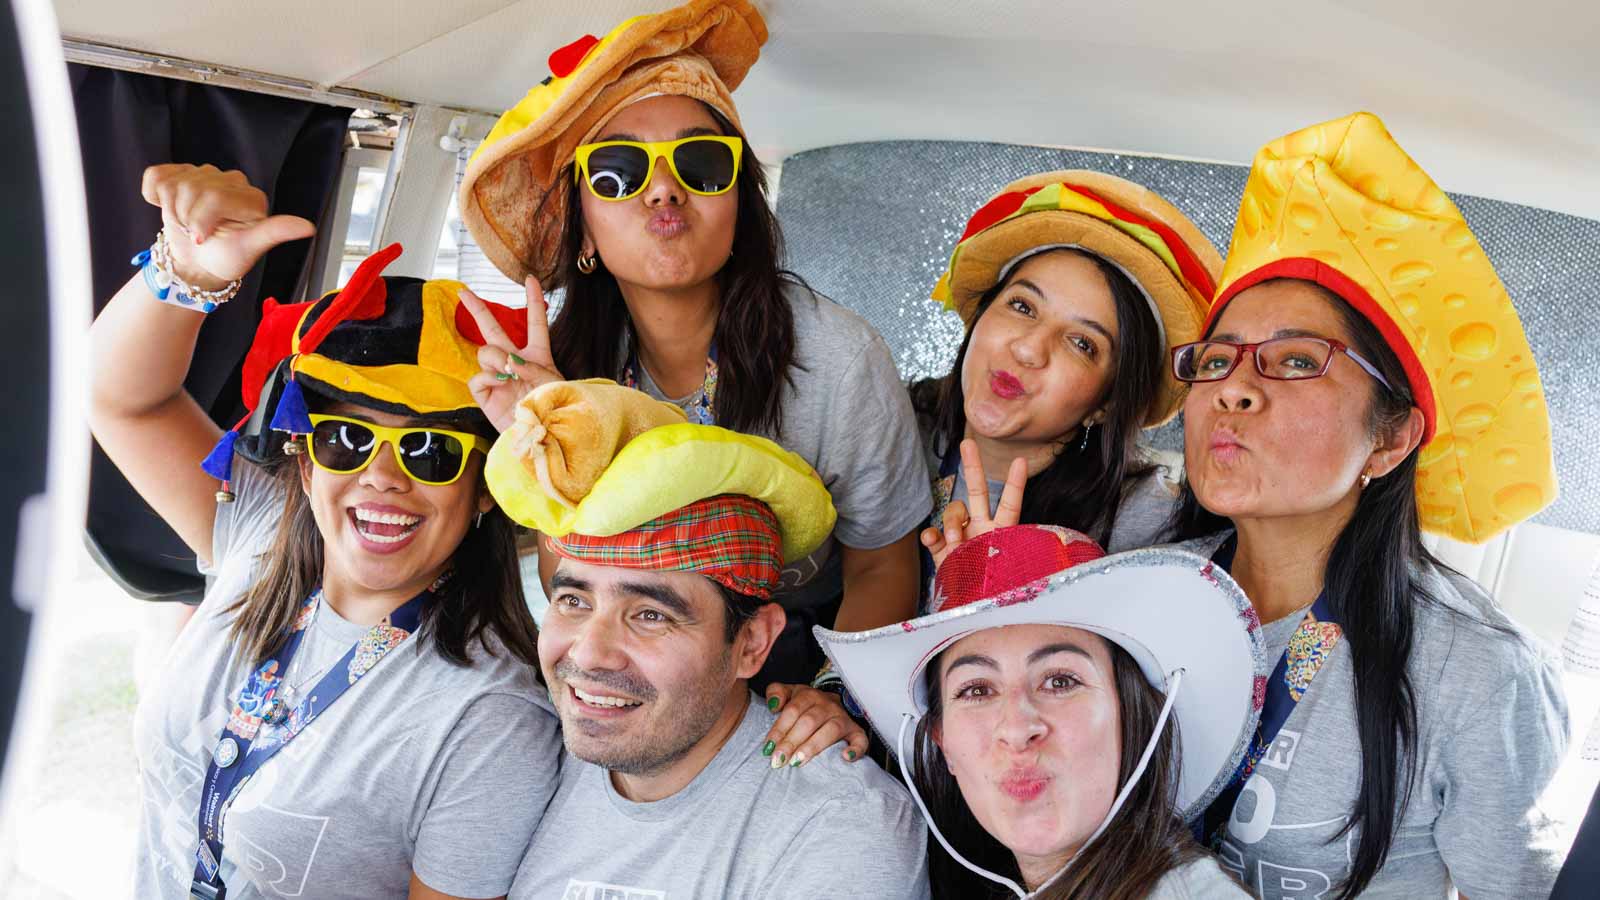 A group of associates wear funny hats and smile at the camera.